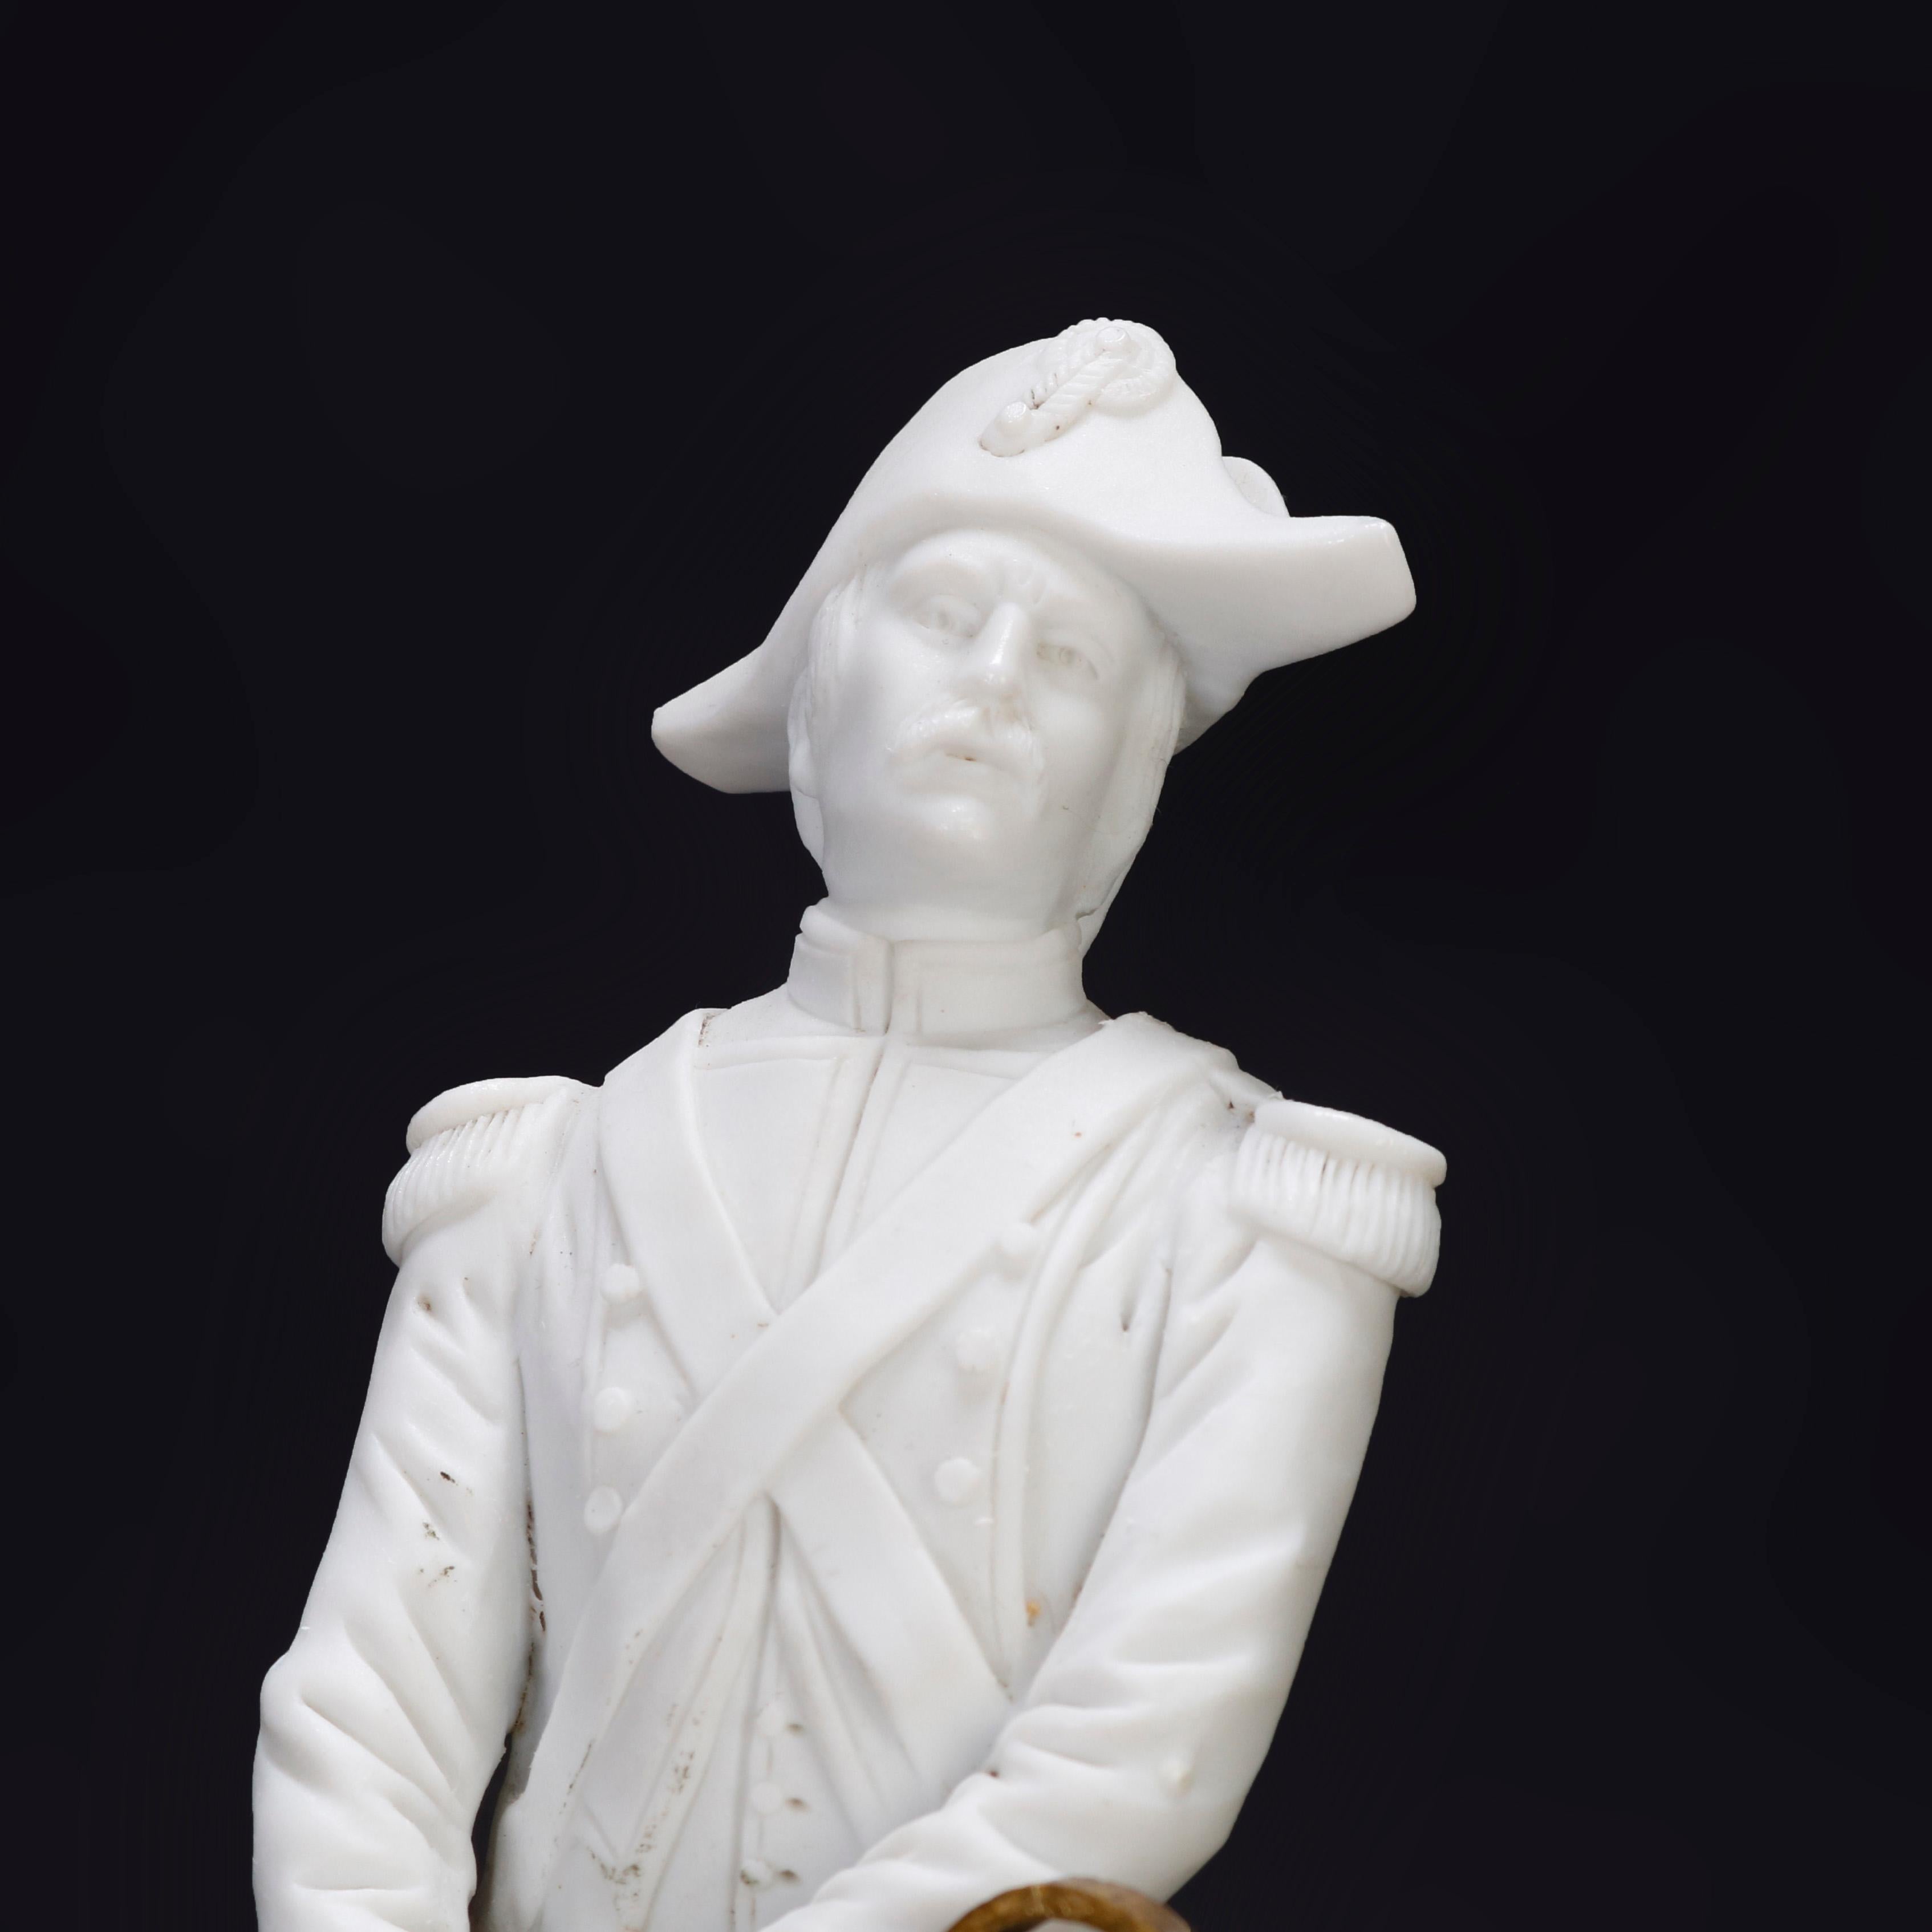 An antique French Sèvres School bisque porcelain figure depicts full length portrait of Emperor of France, Napoleon Bonaparte, in full military dress with bronze sword, circa 1820.

Measures: 7.5